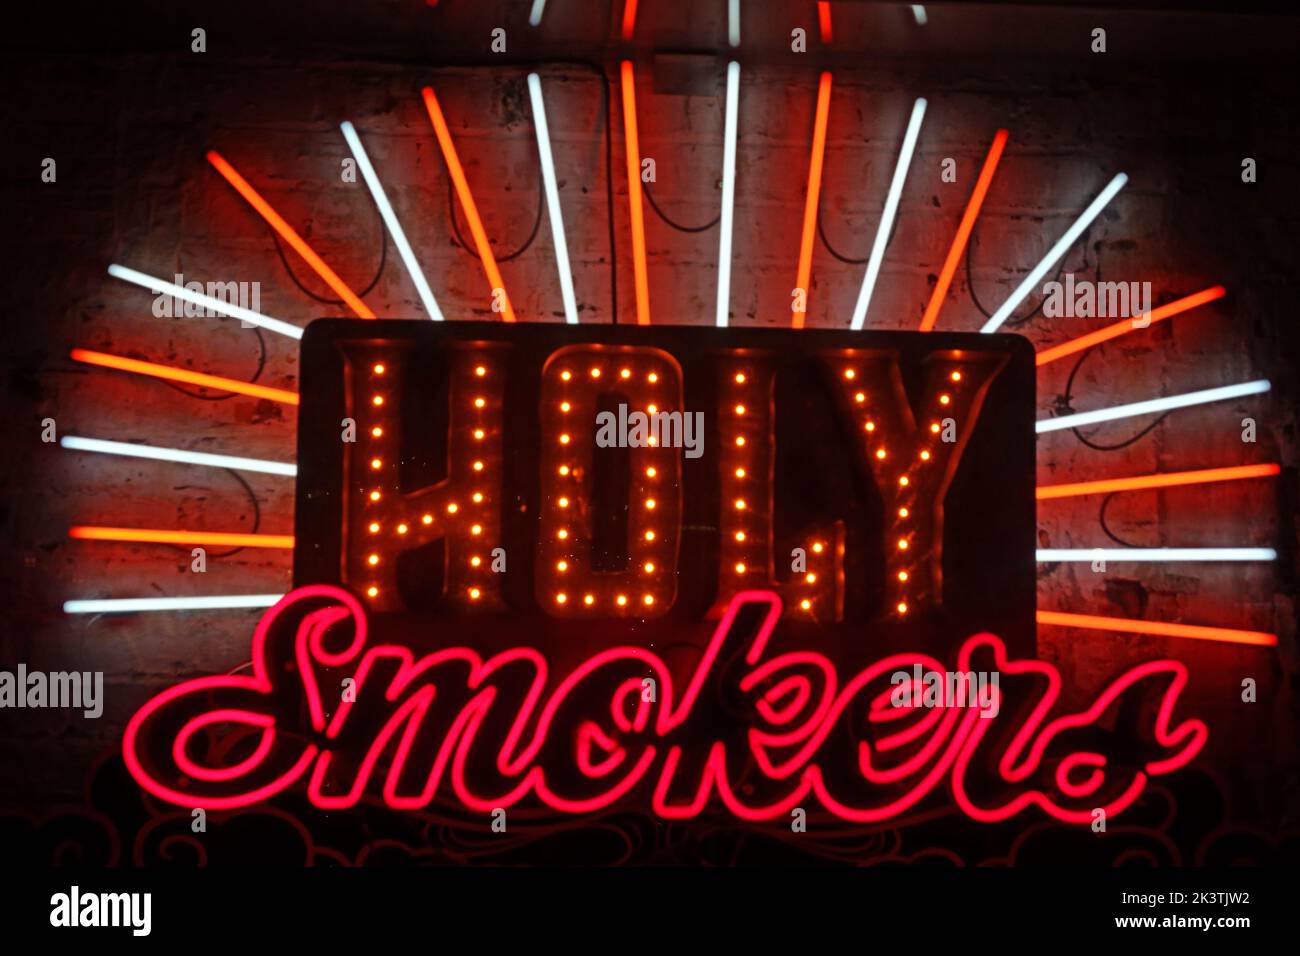 Holy Smokers neon sign, at Reds true BBQ restaurant, 22 Lloyd St, Manchester, England, UK,  M2 5WA Stock Photo